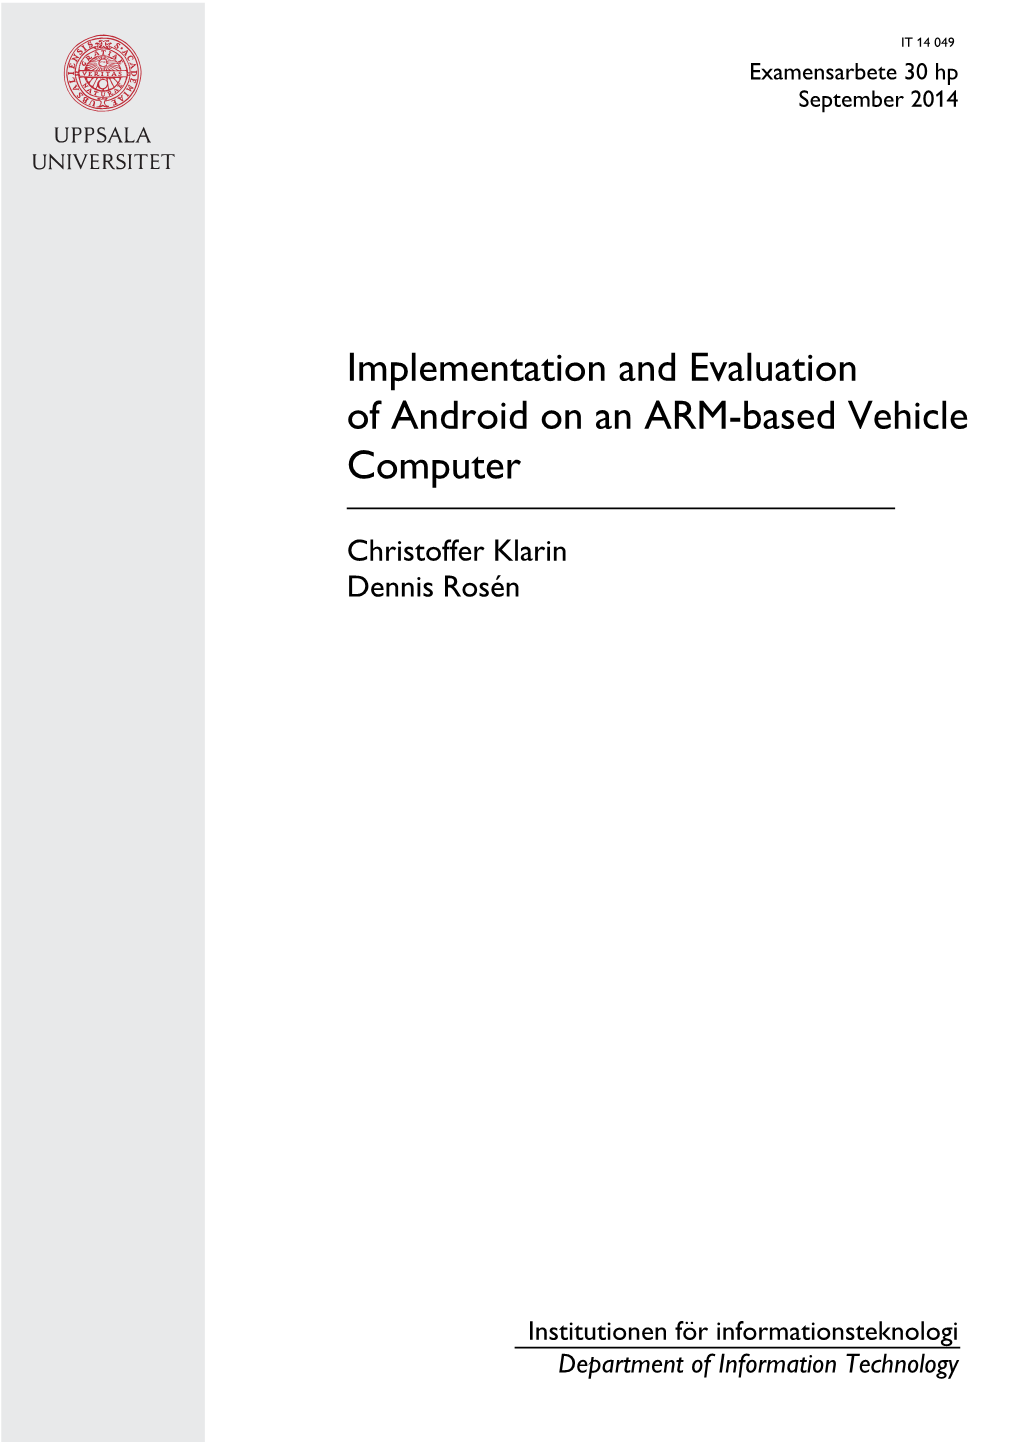 Implementation and Evaluation of Android on an ARM-Based Vehicle Computer